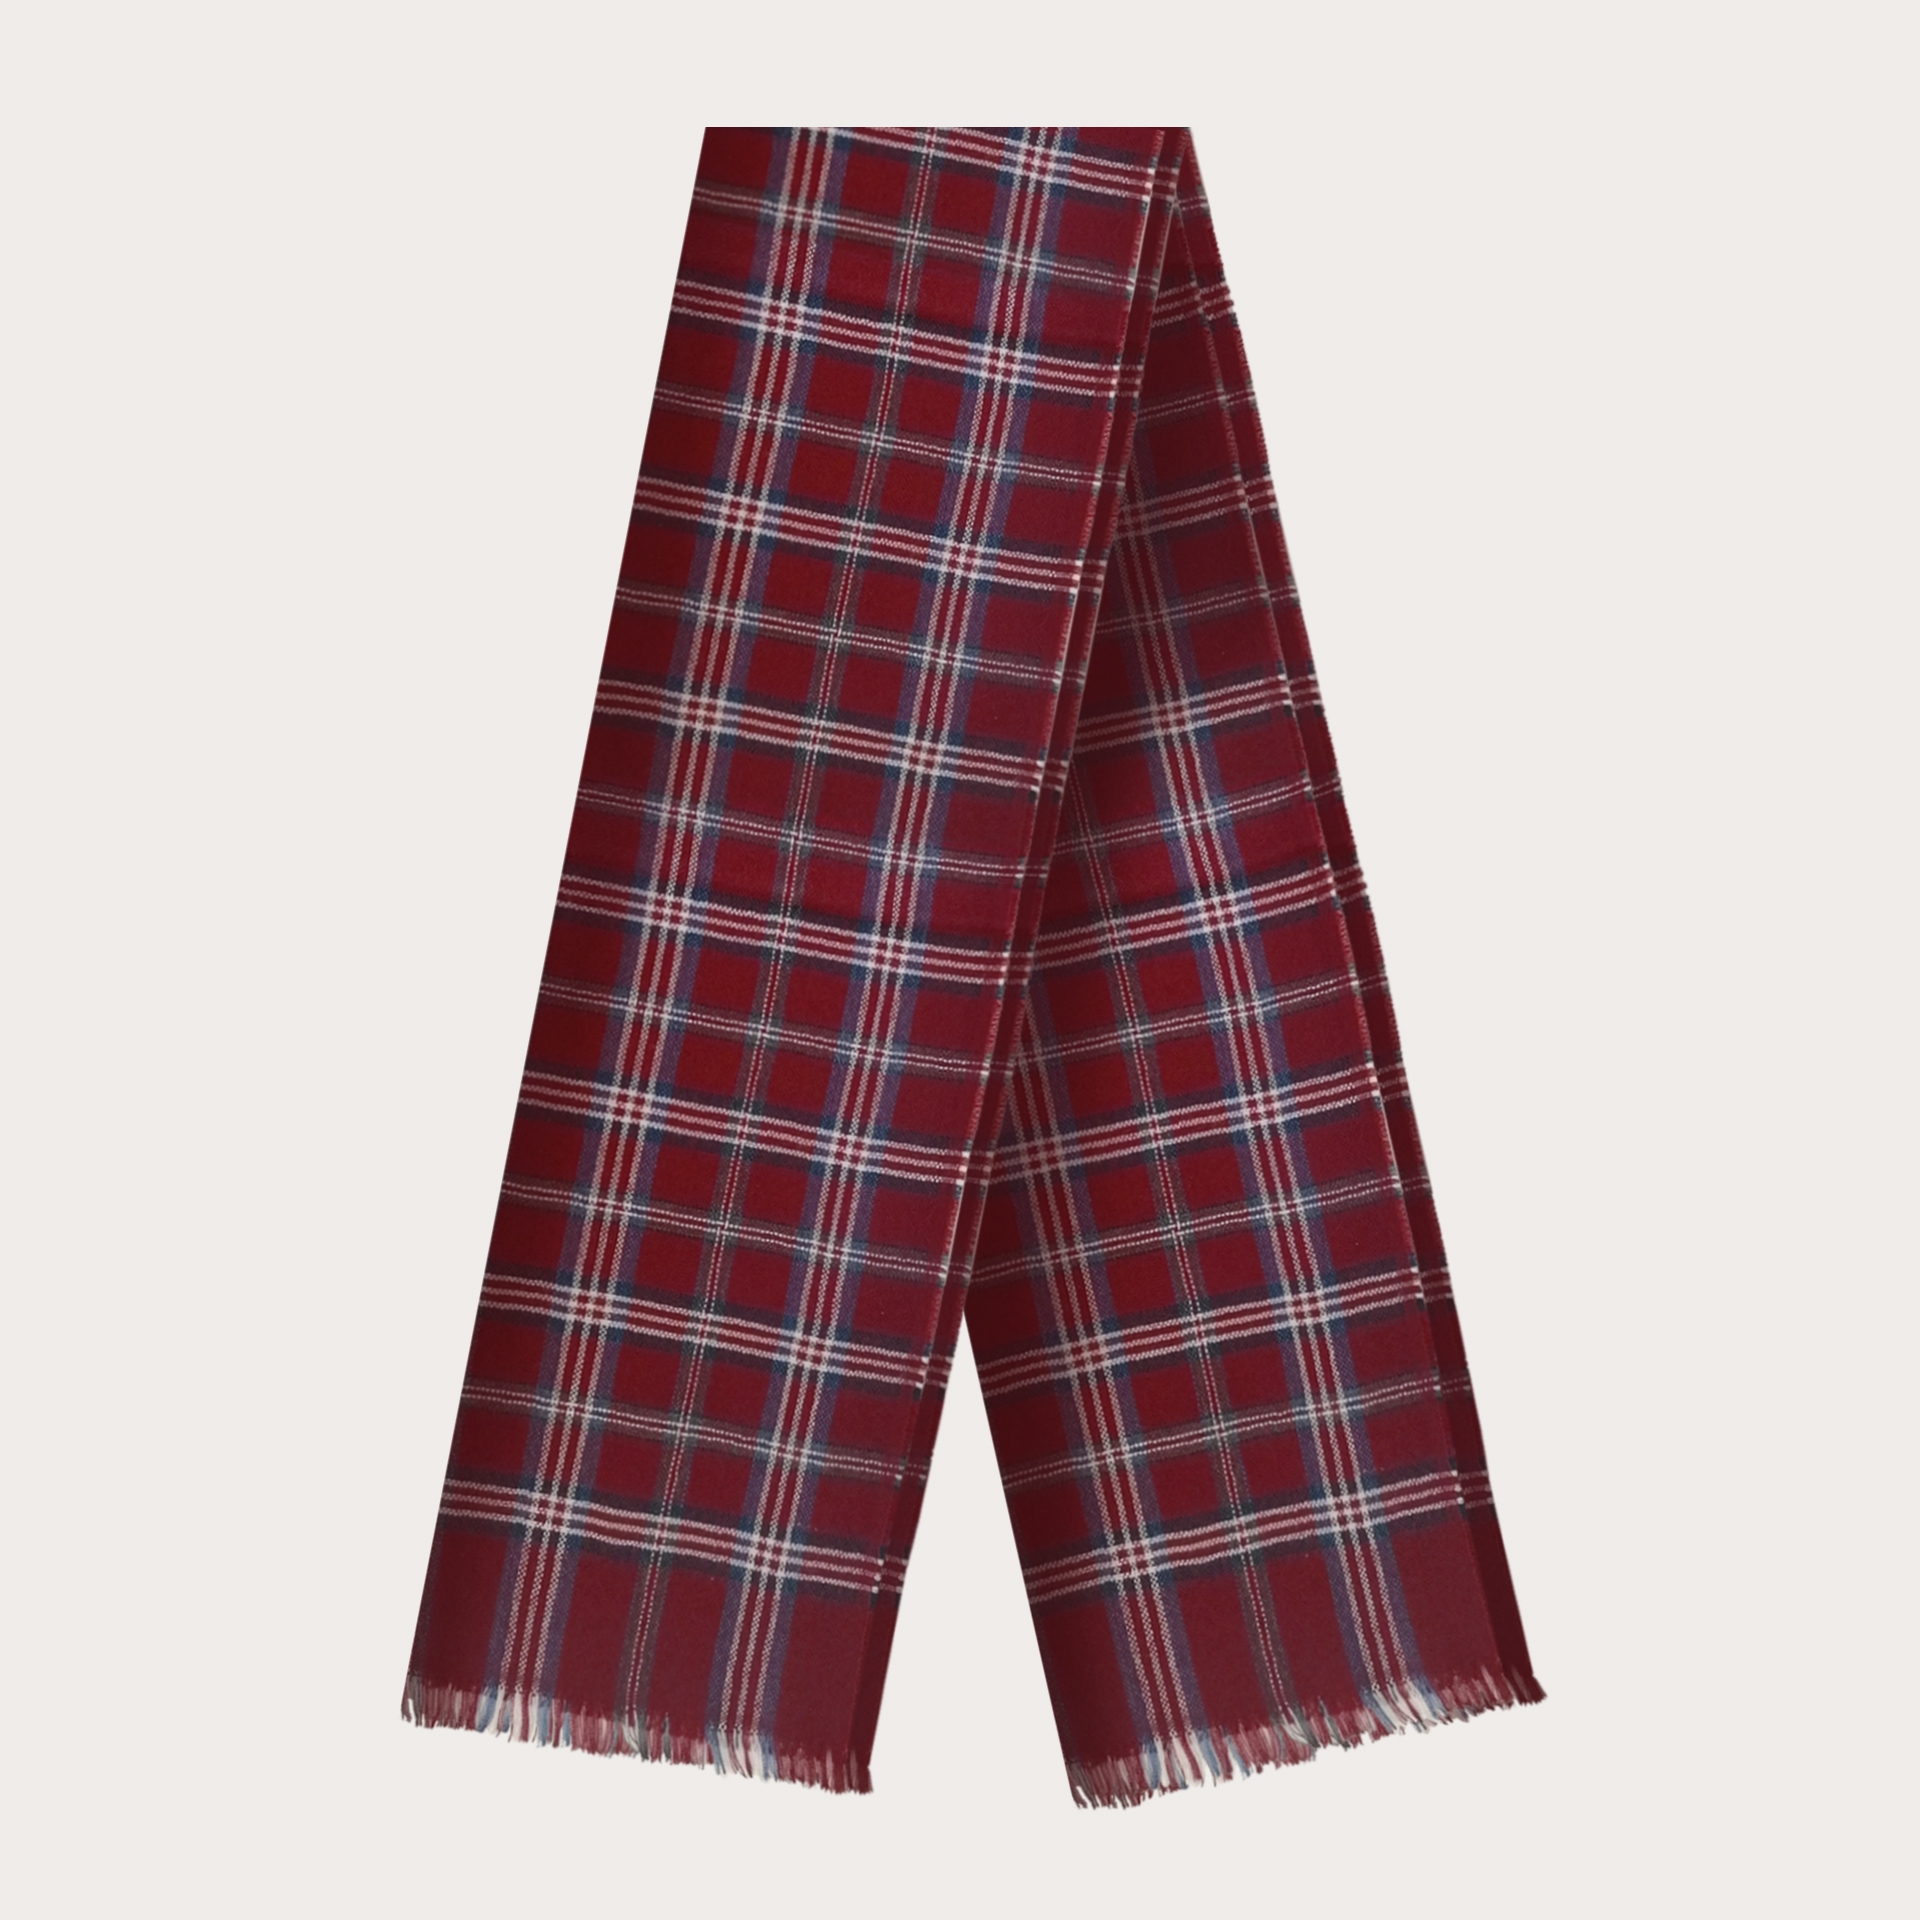 BRUCLE Woolen scarf with tartan pattern, burgundy, blue and white